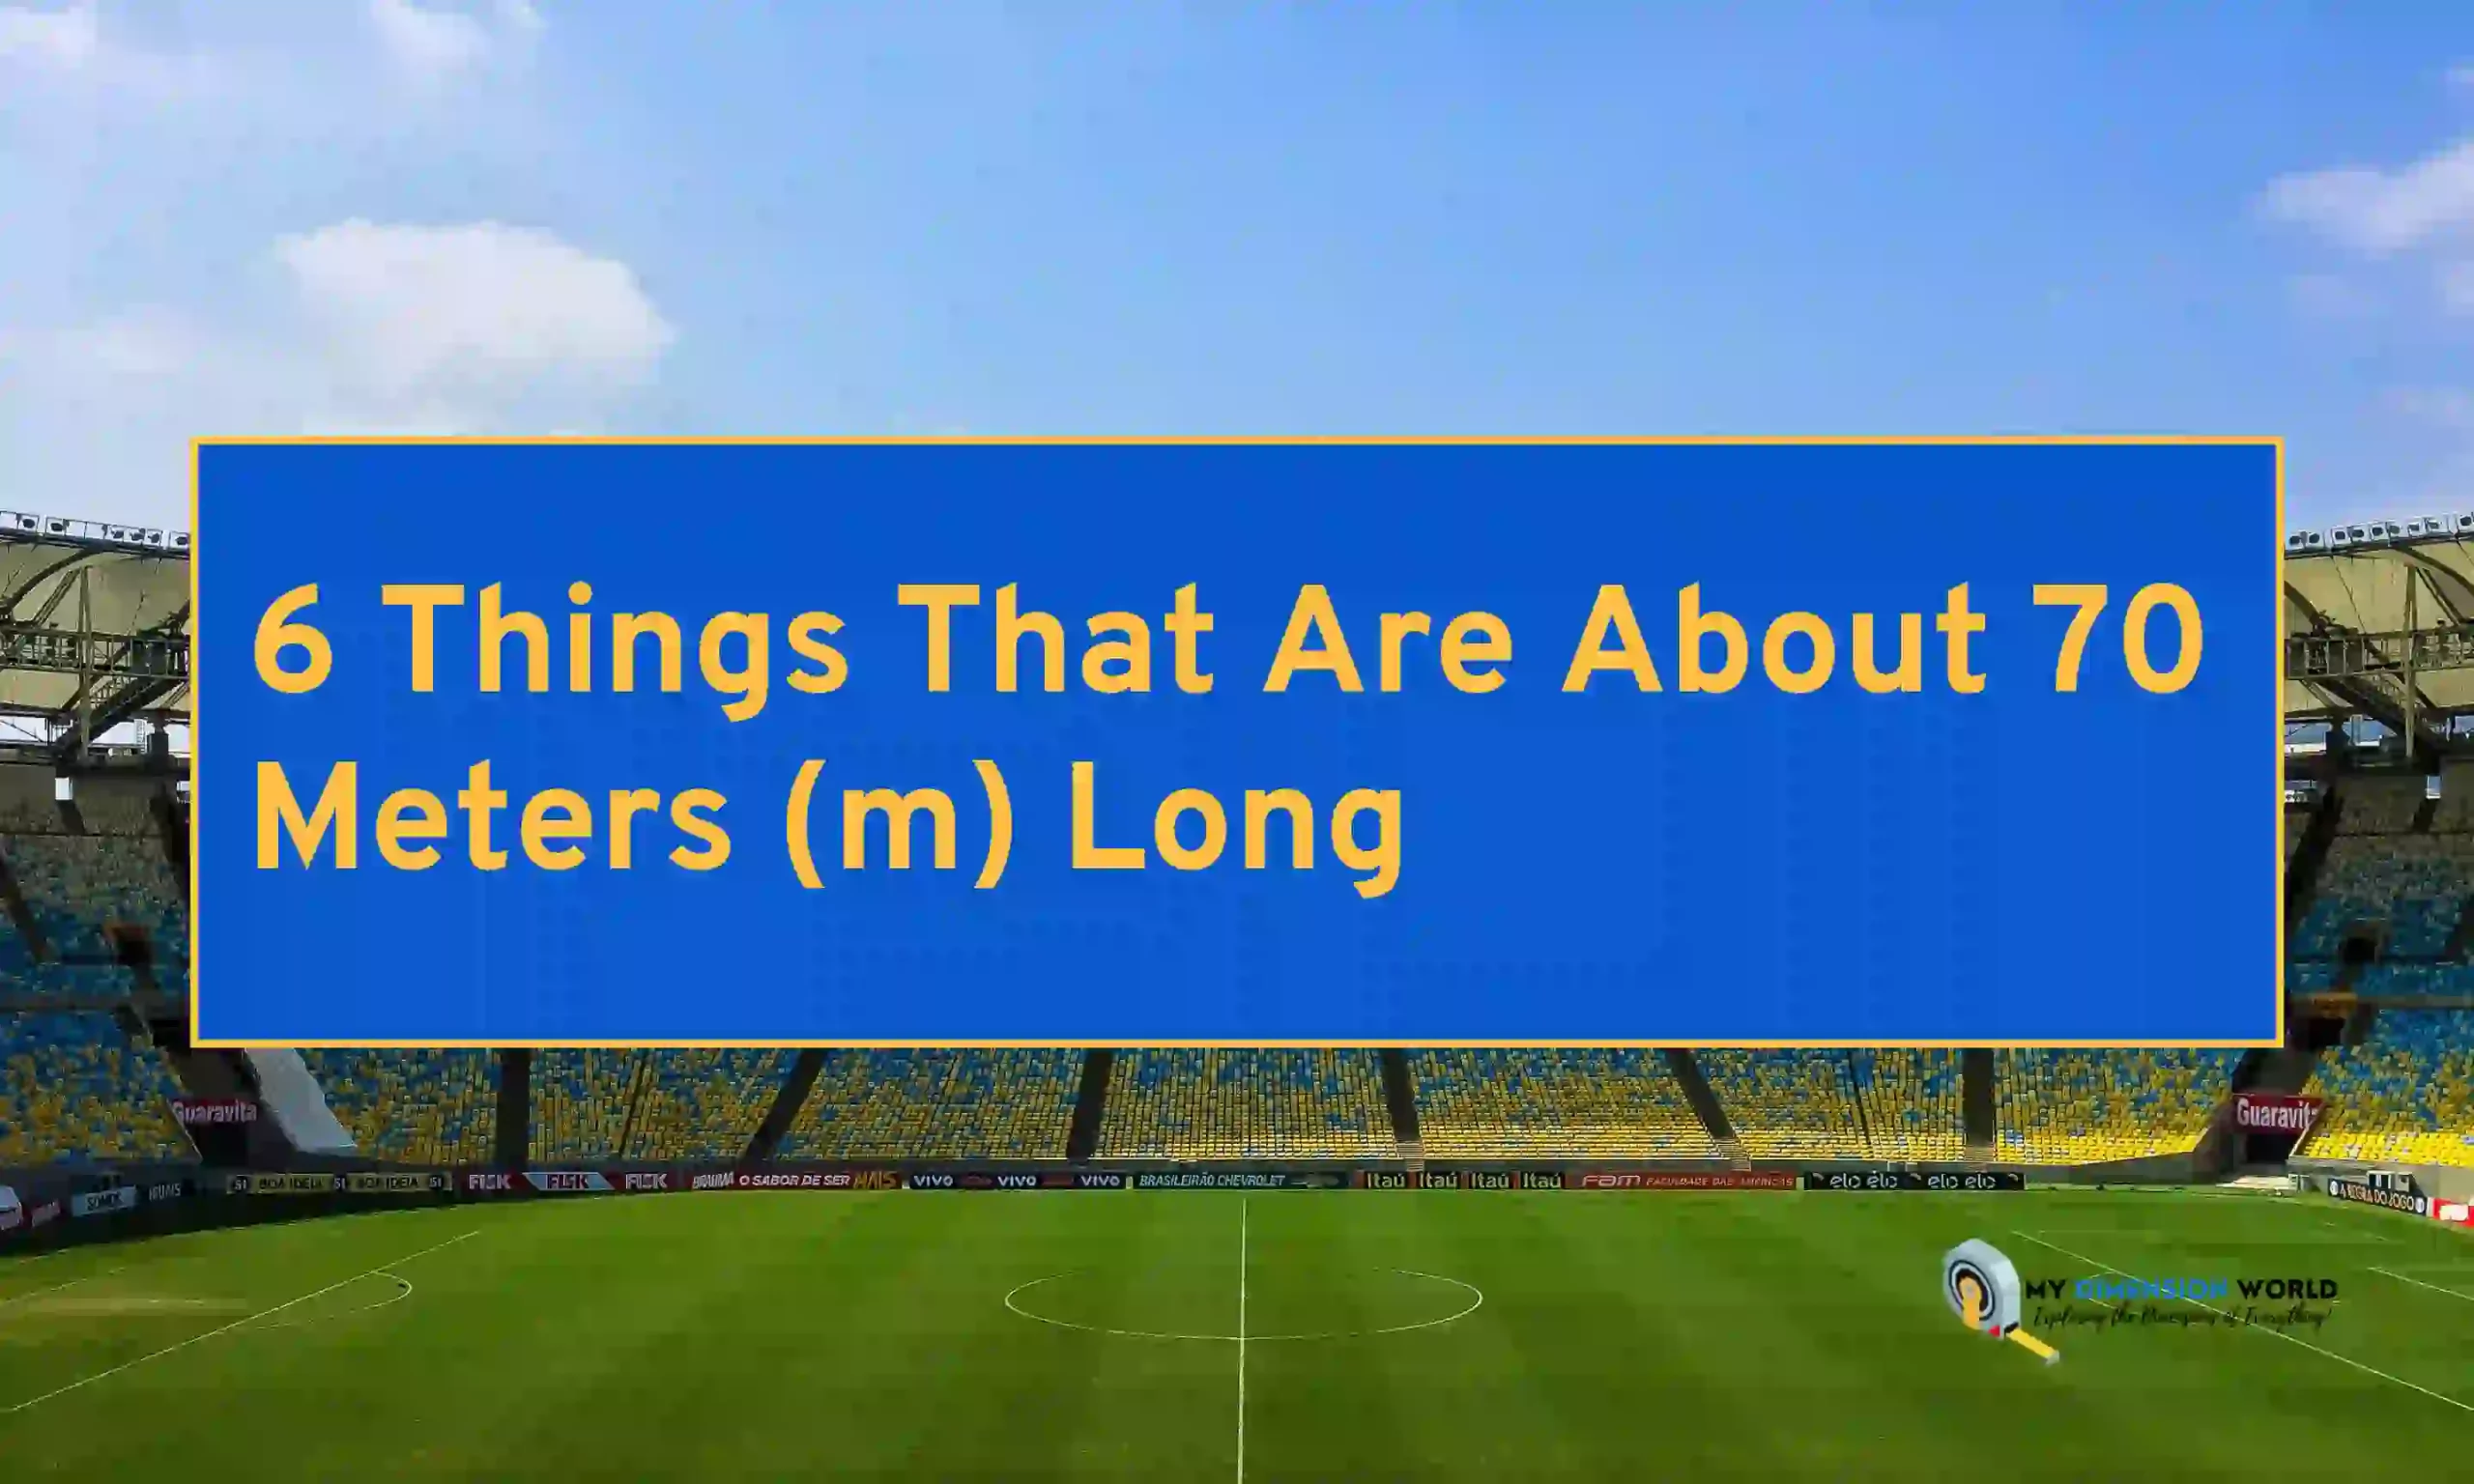 6 Things That Are About 70 Meters (m) Long